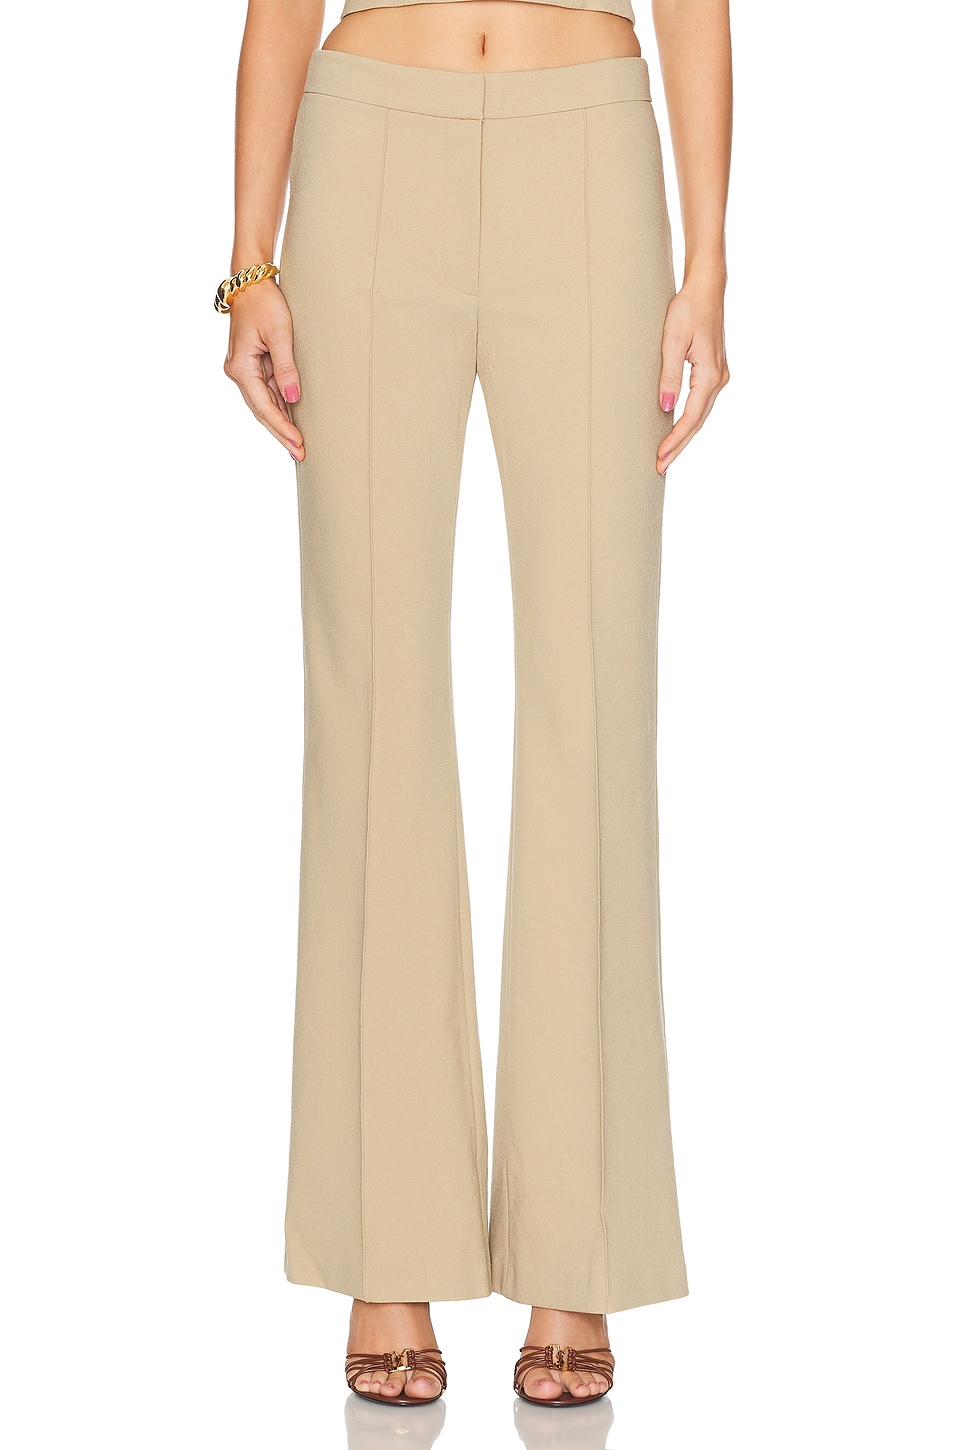 Image 1 of SANS FAFF Lizzy Low Rise Flared Trouser in Camel